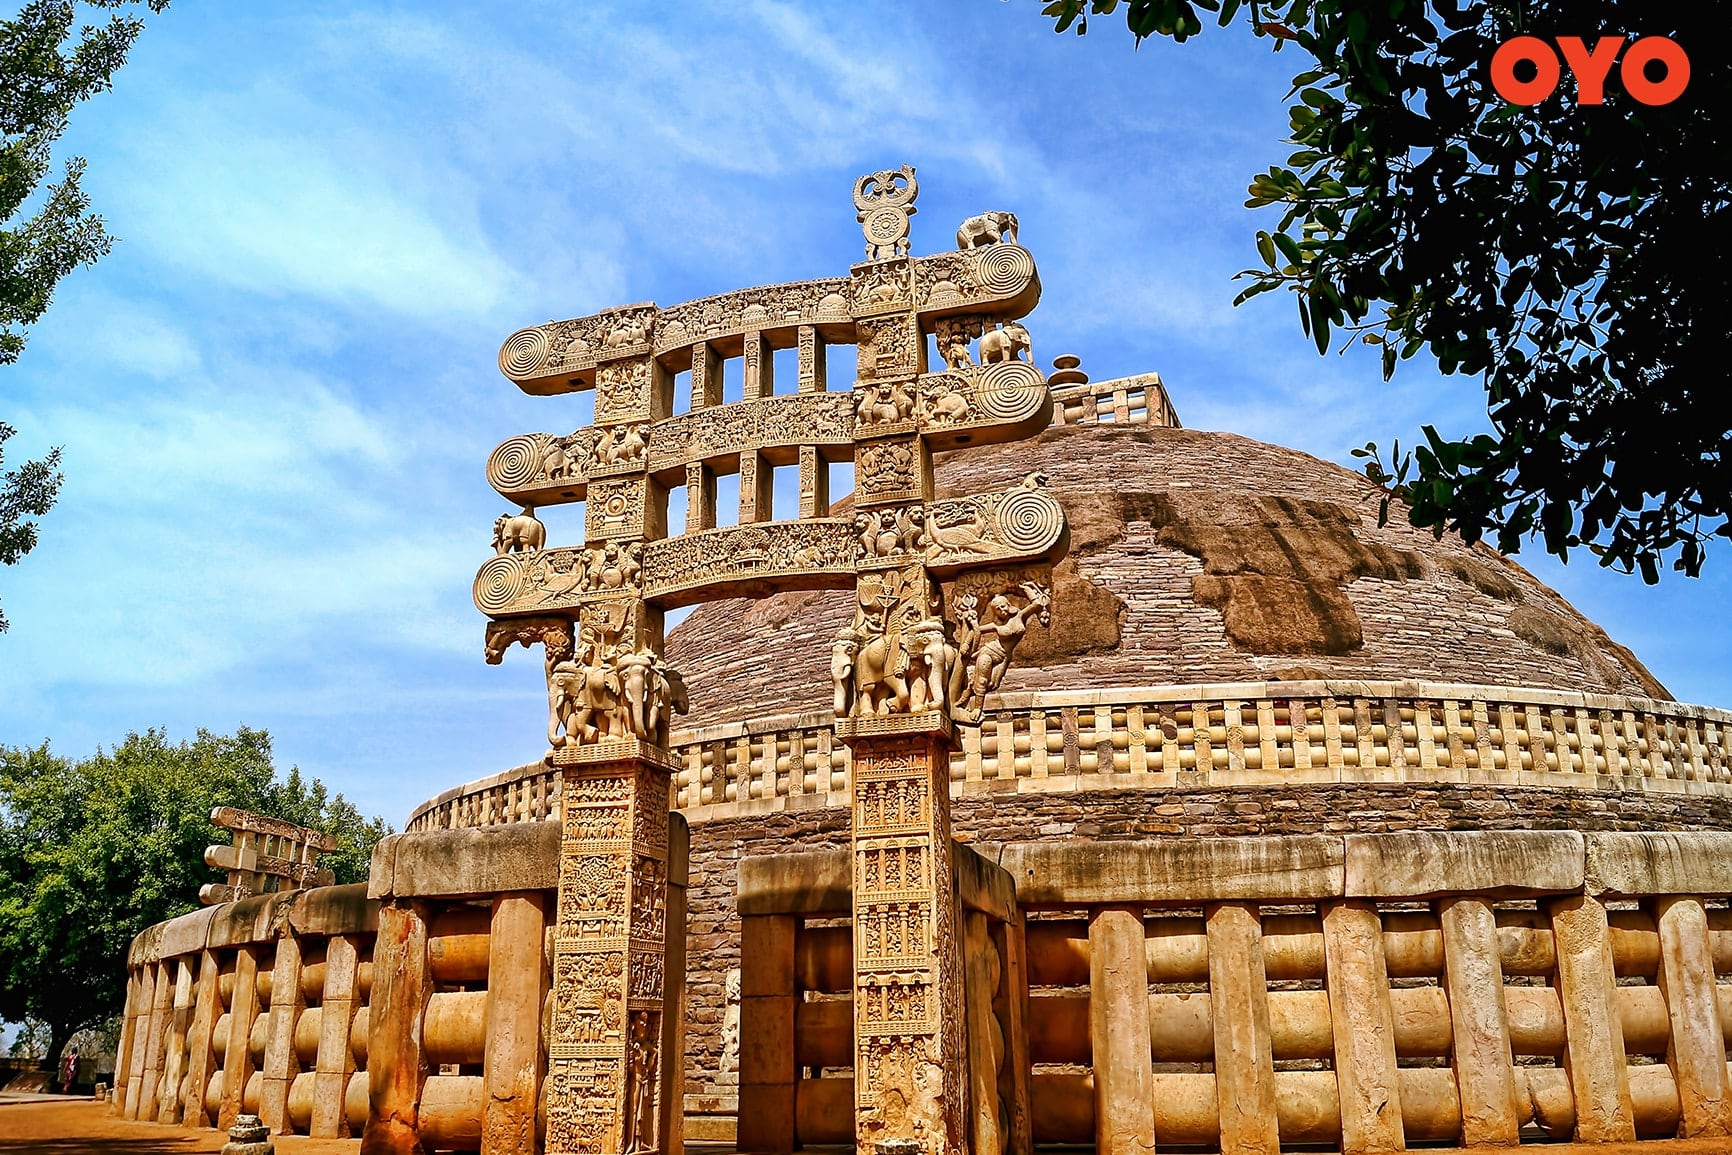 Sanchi Stupa, Madhya Pradesh - one of the most famous historical buildings in India